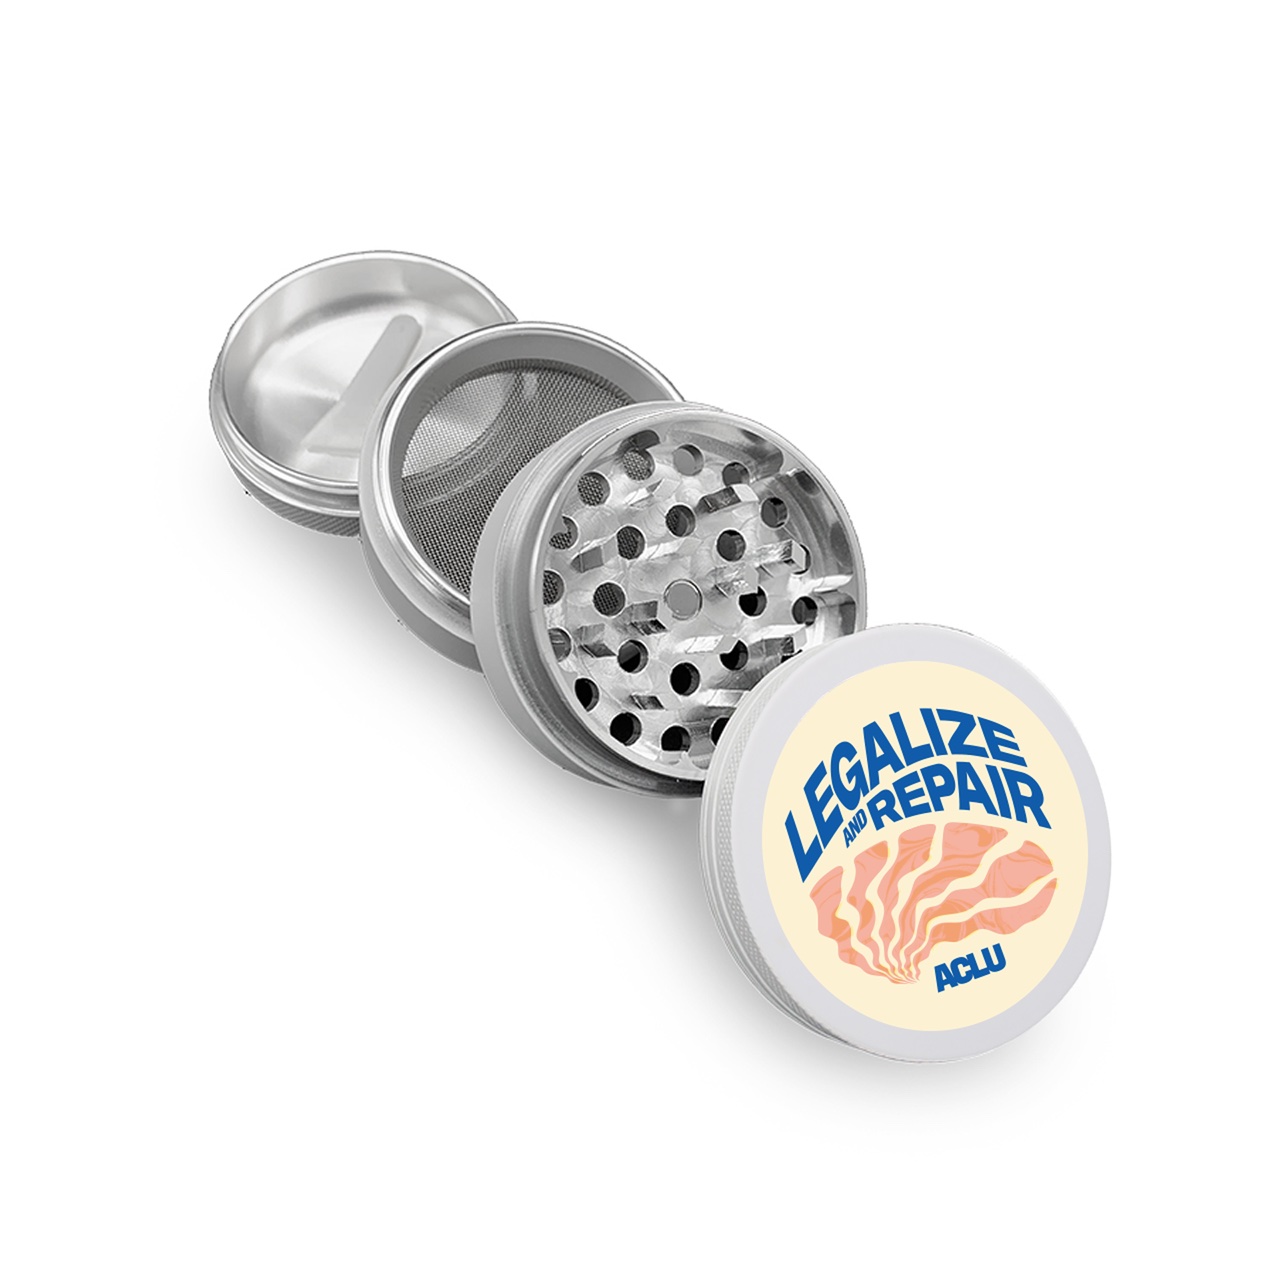 A picture of the Legalize and Repair Grinder from the ACLU store.